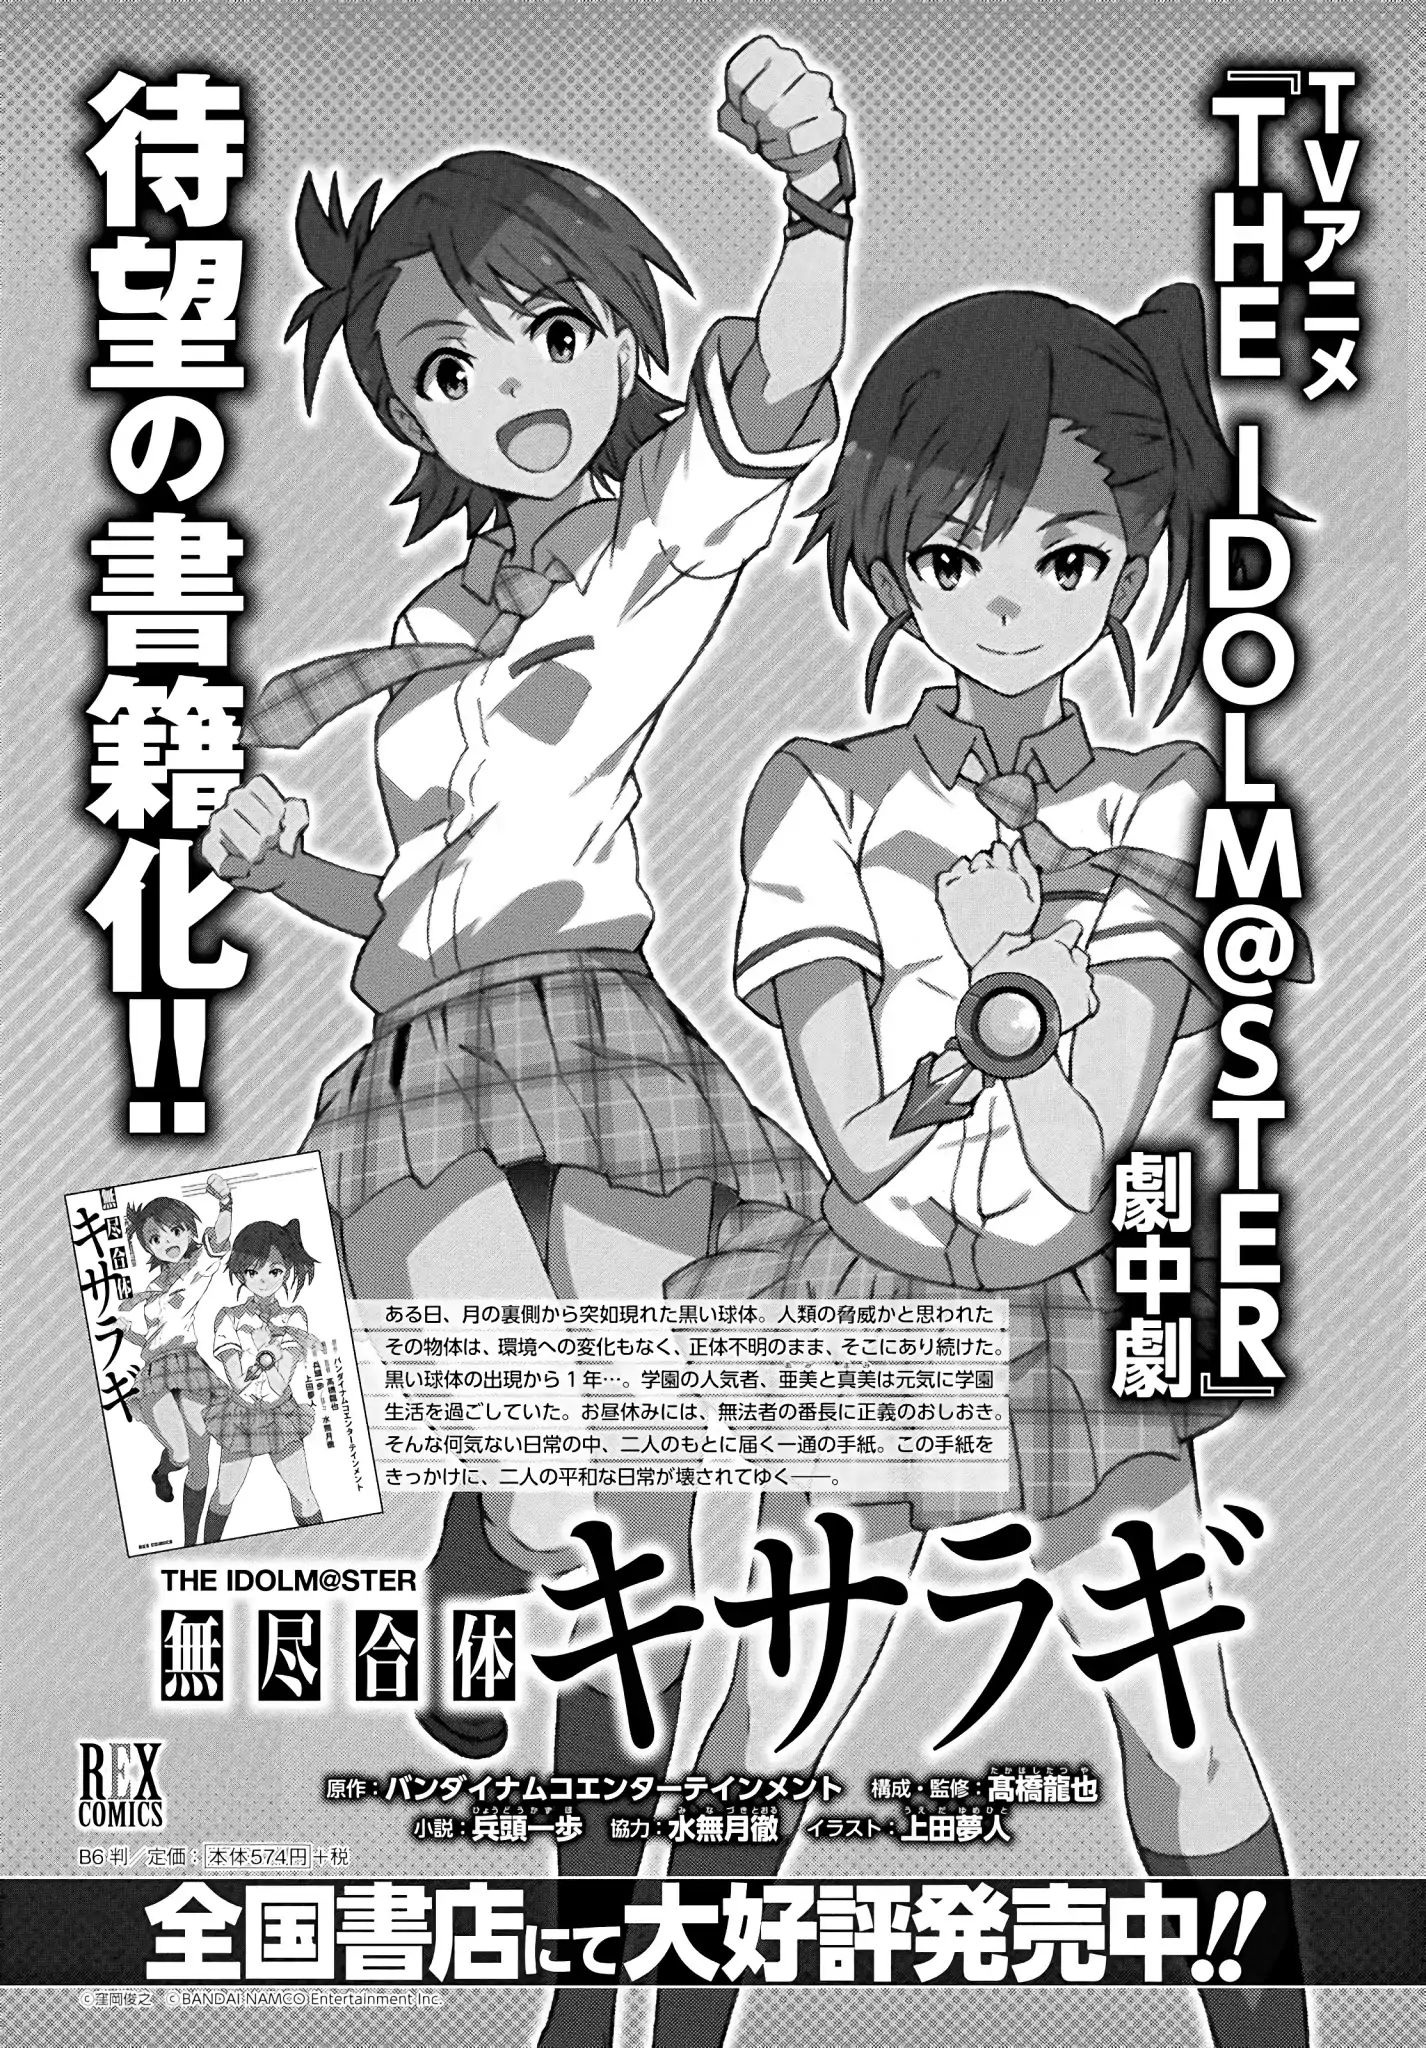 The Idolm@ster: Asayake Wa Koganeiro Vol.1 Chapter 10: Under The Spell That Kotomi Otonashi Cast - Picture 1